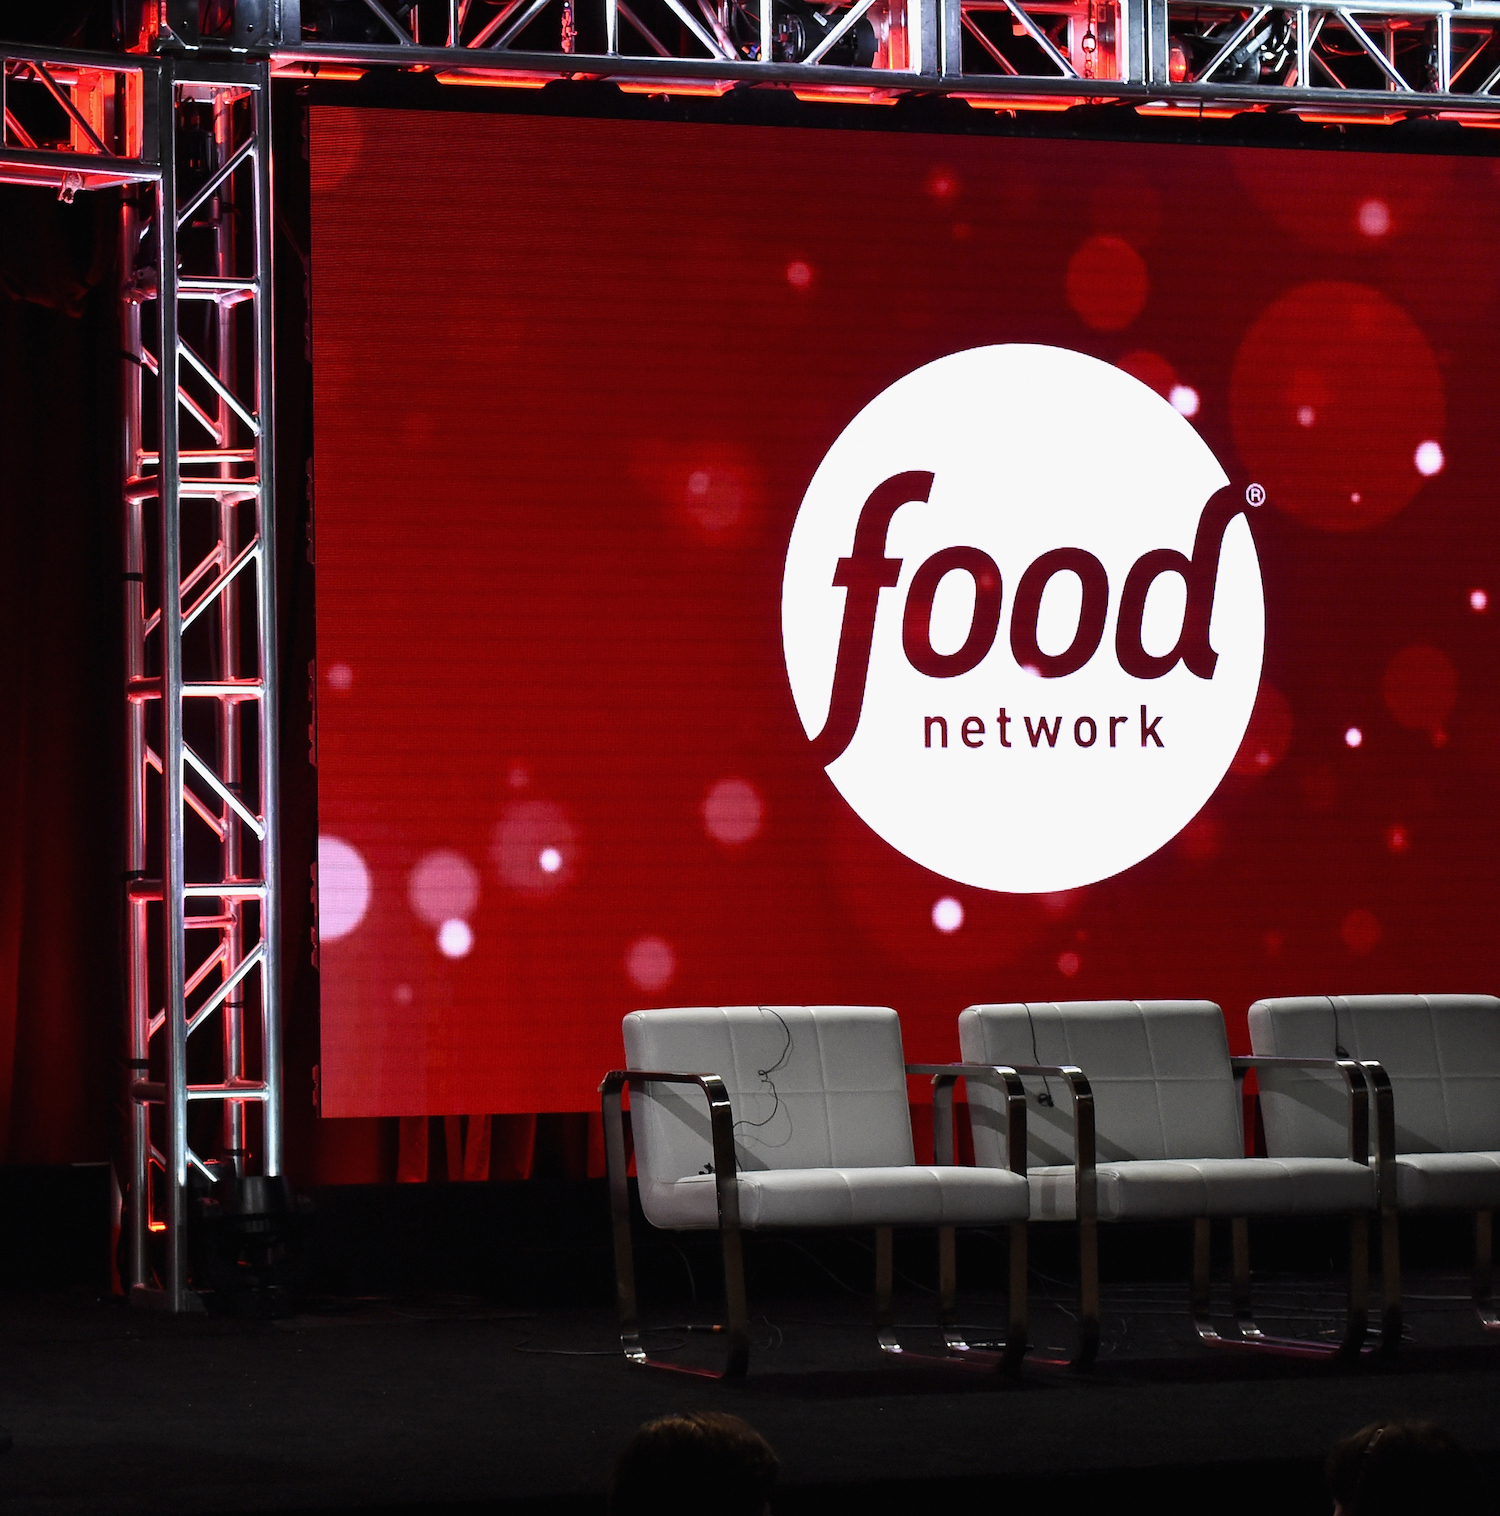 Food Network logo projected on a screen with three gray chairs in front